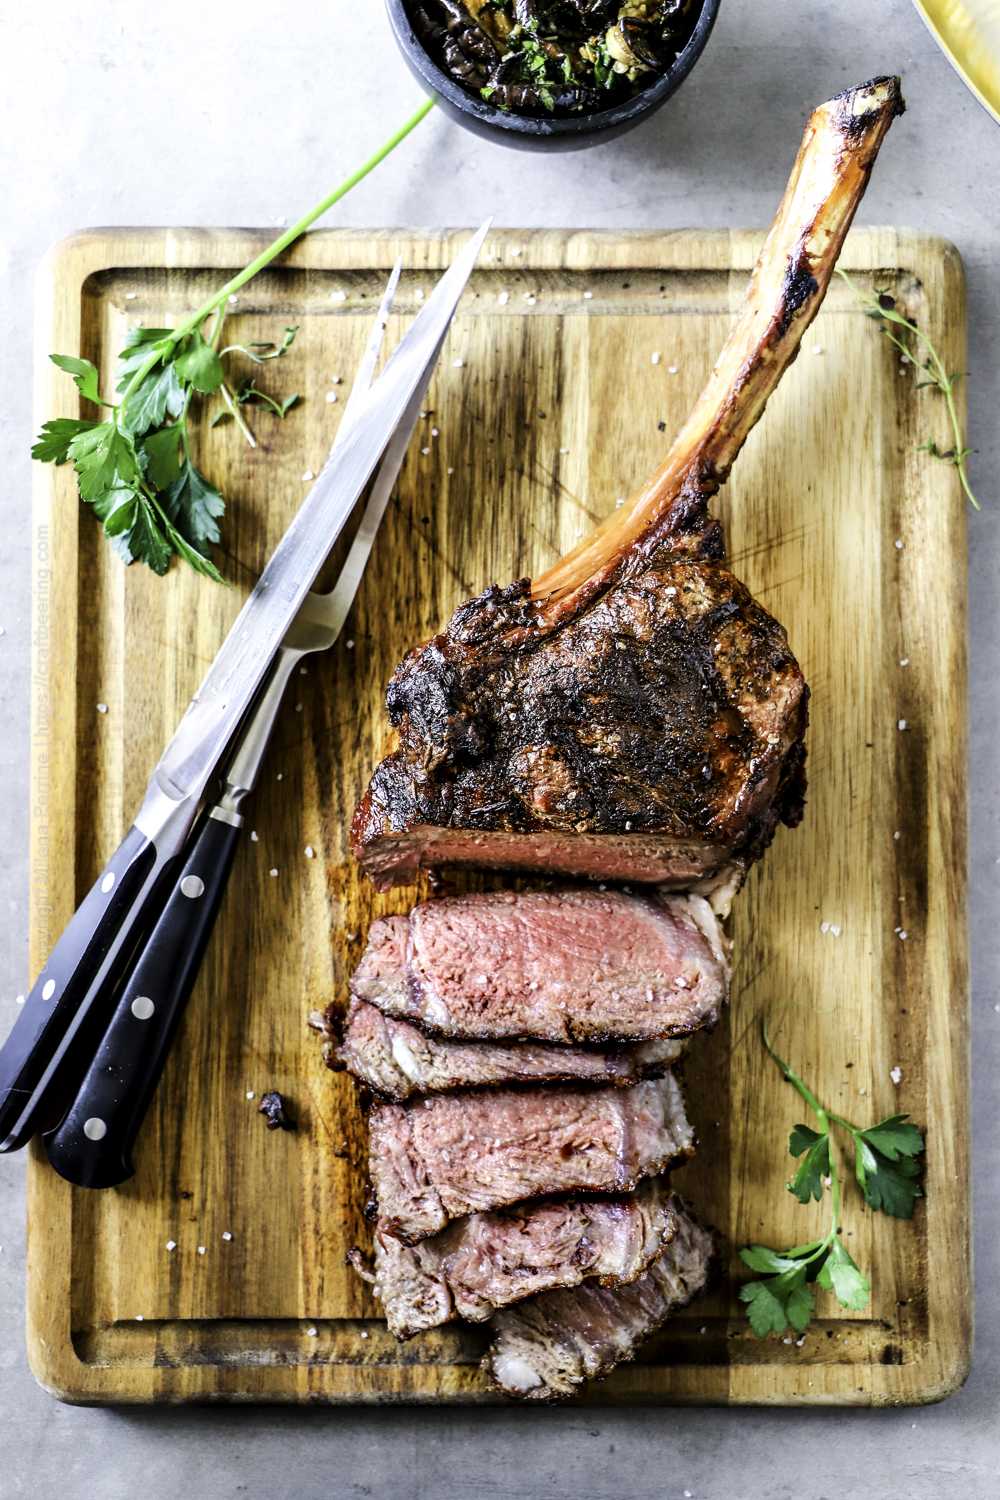 Perfect tomahawk steak - medium rare, juicy meat and nicely seared outside.